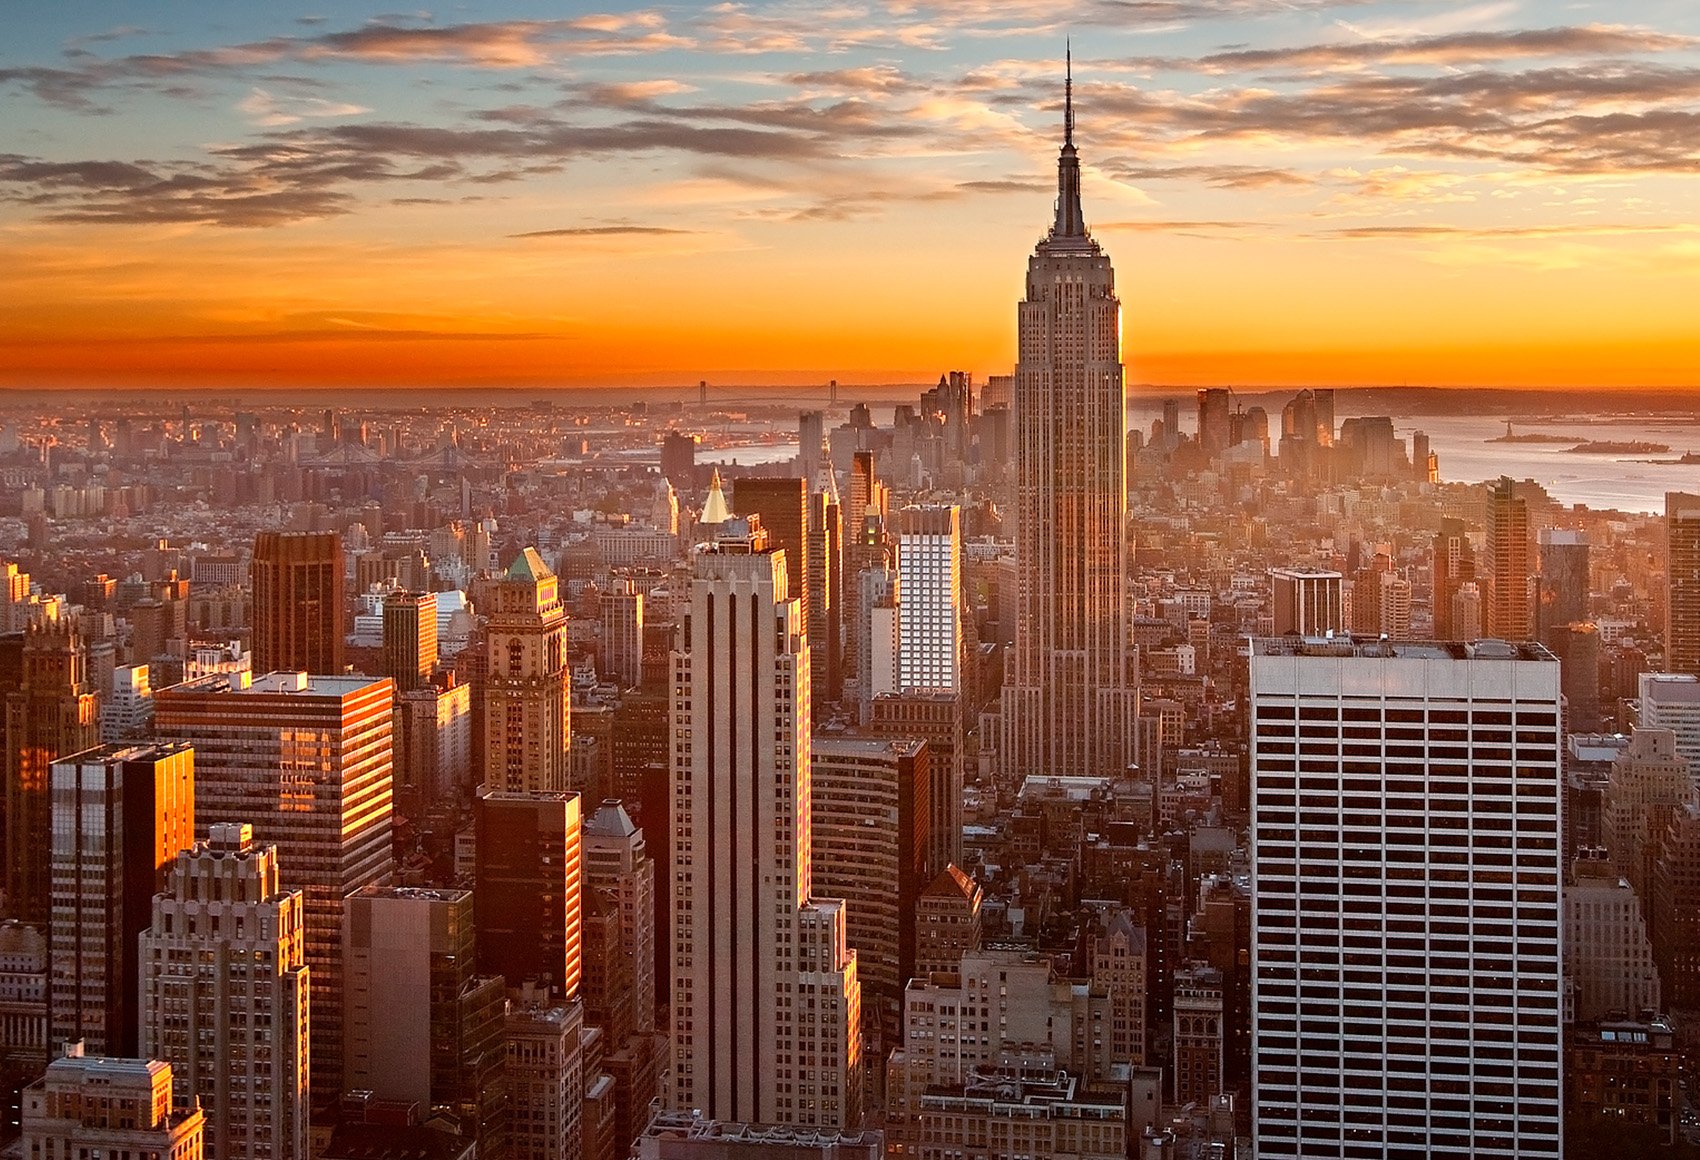 Skyline view of the Empire State Building and downtown New York City at sunset